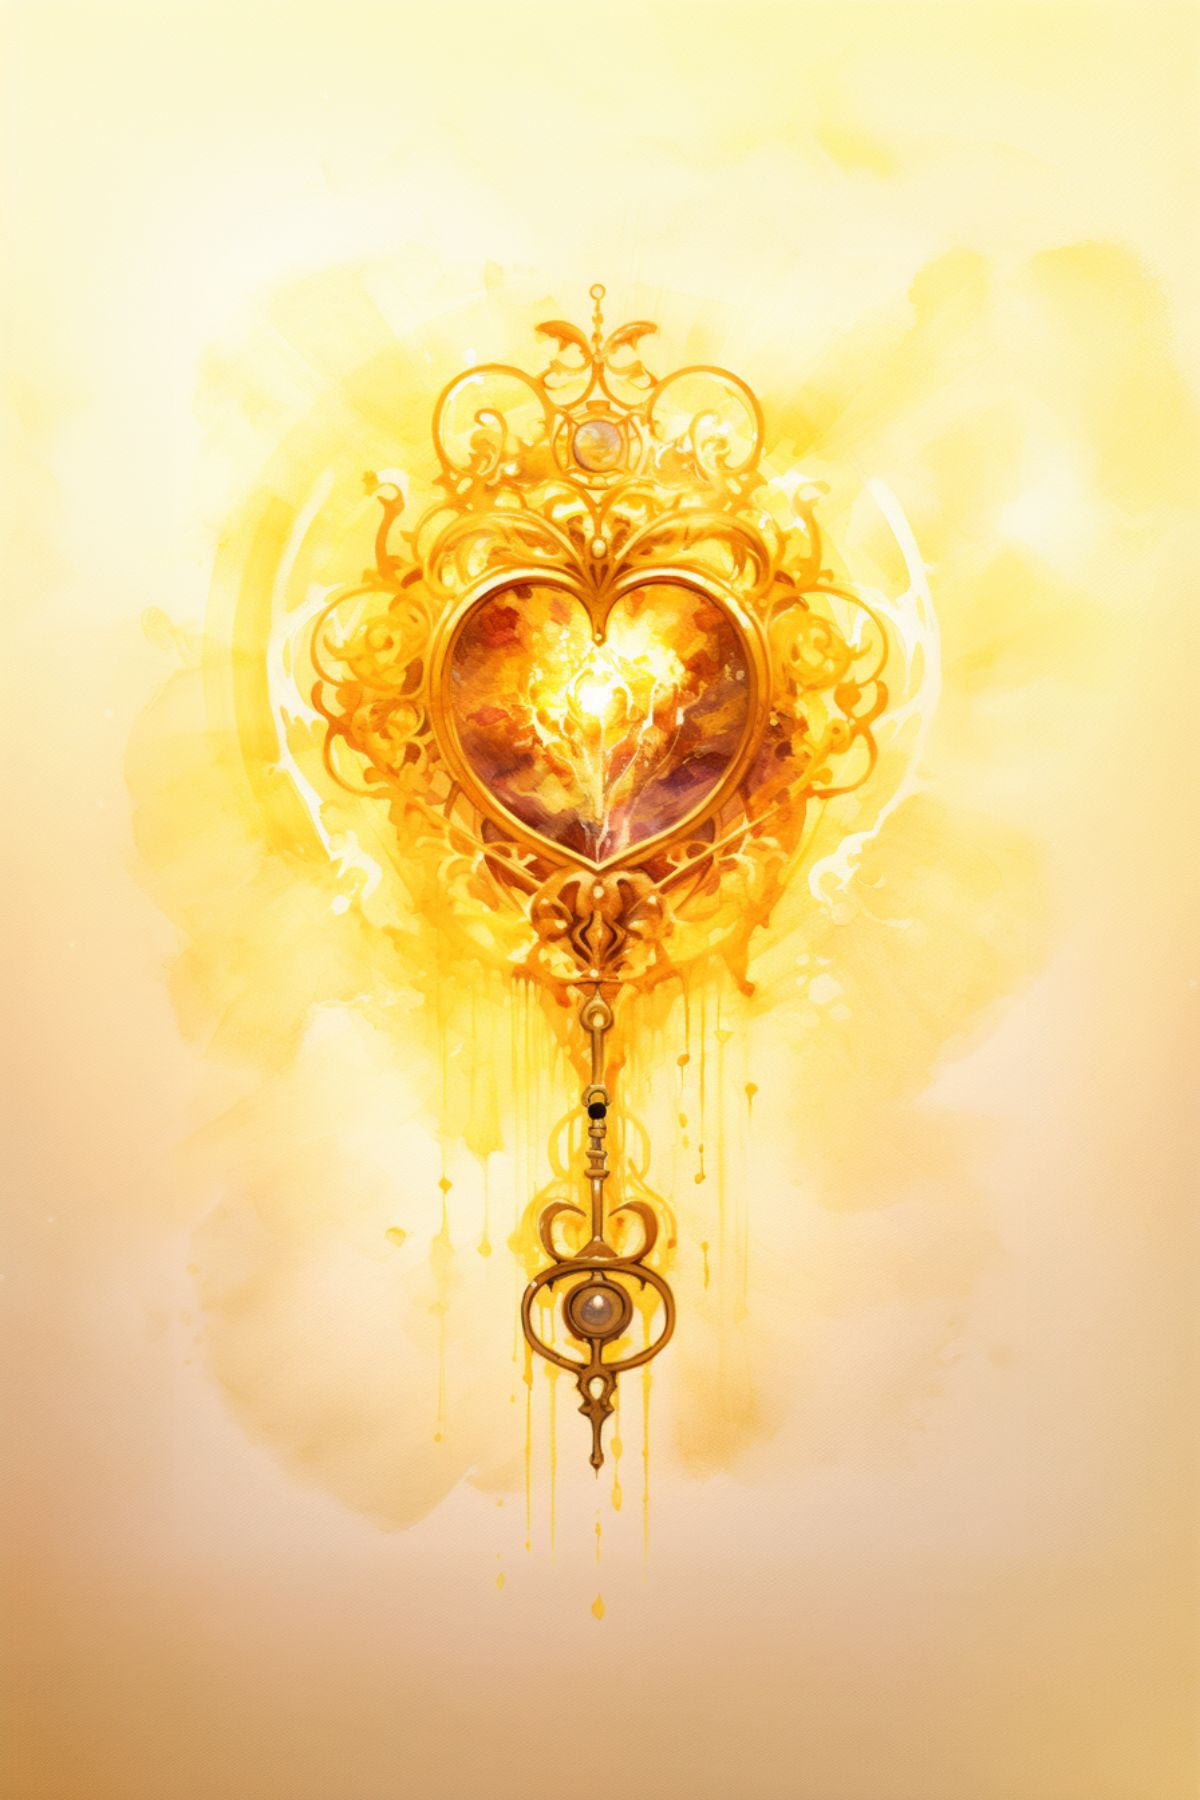 watercolor image of a key with a heart in it symbolizing health and vitality